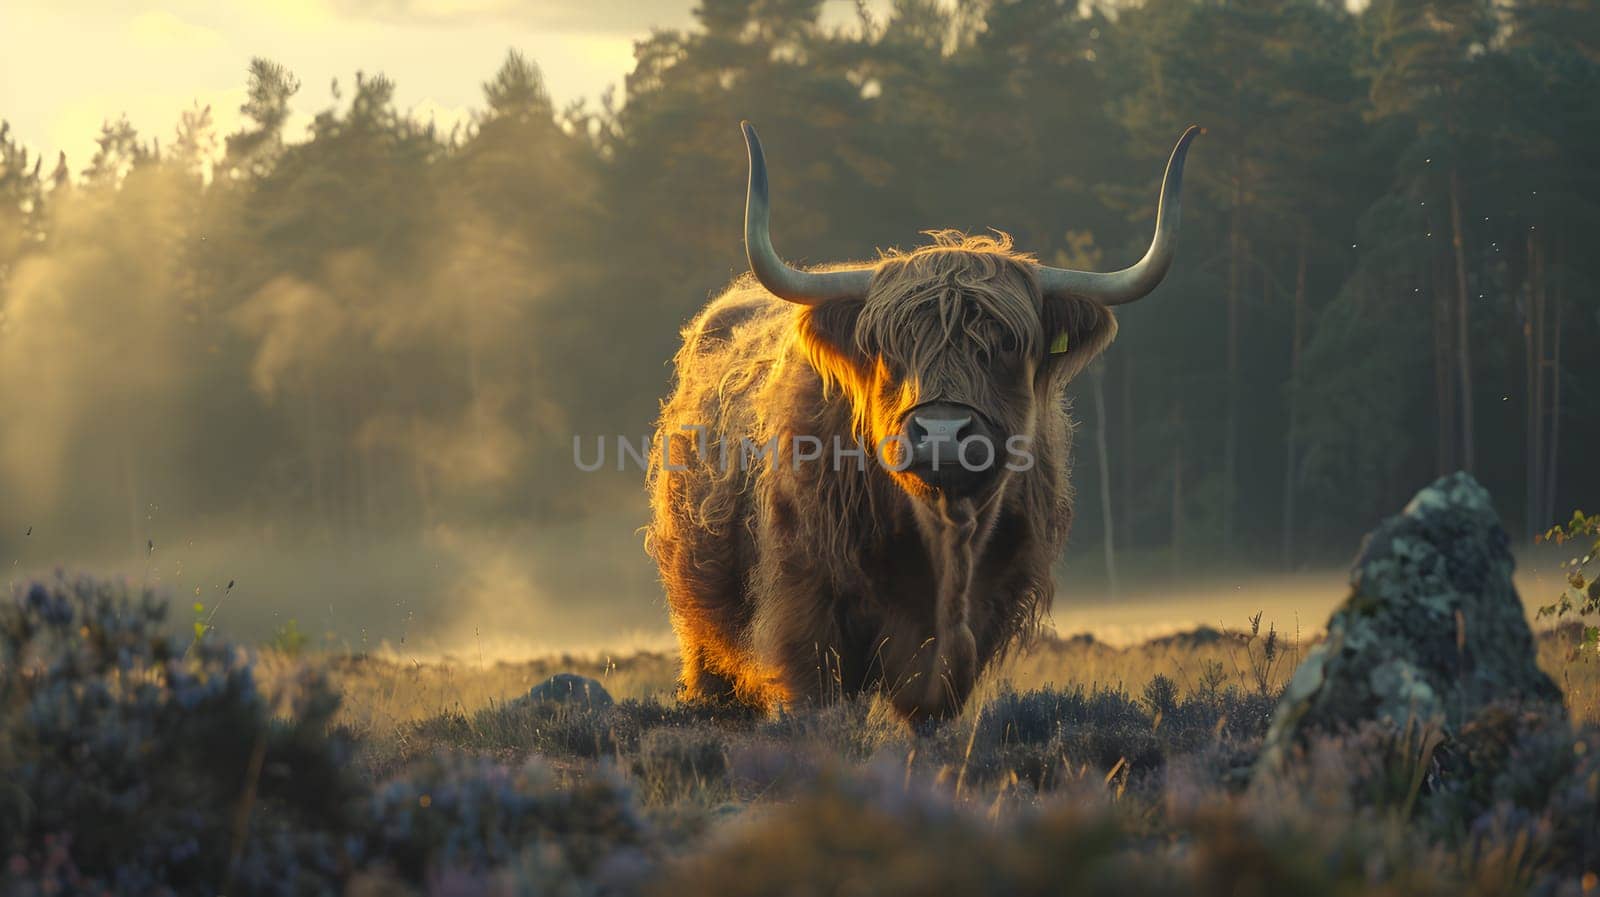 A bull yak with long horns is grazing in a grassy ecoregion, surrounded by trees and natural landscape. This terrestrial animal is a working animal and valuable livestock, resembling an ox